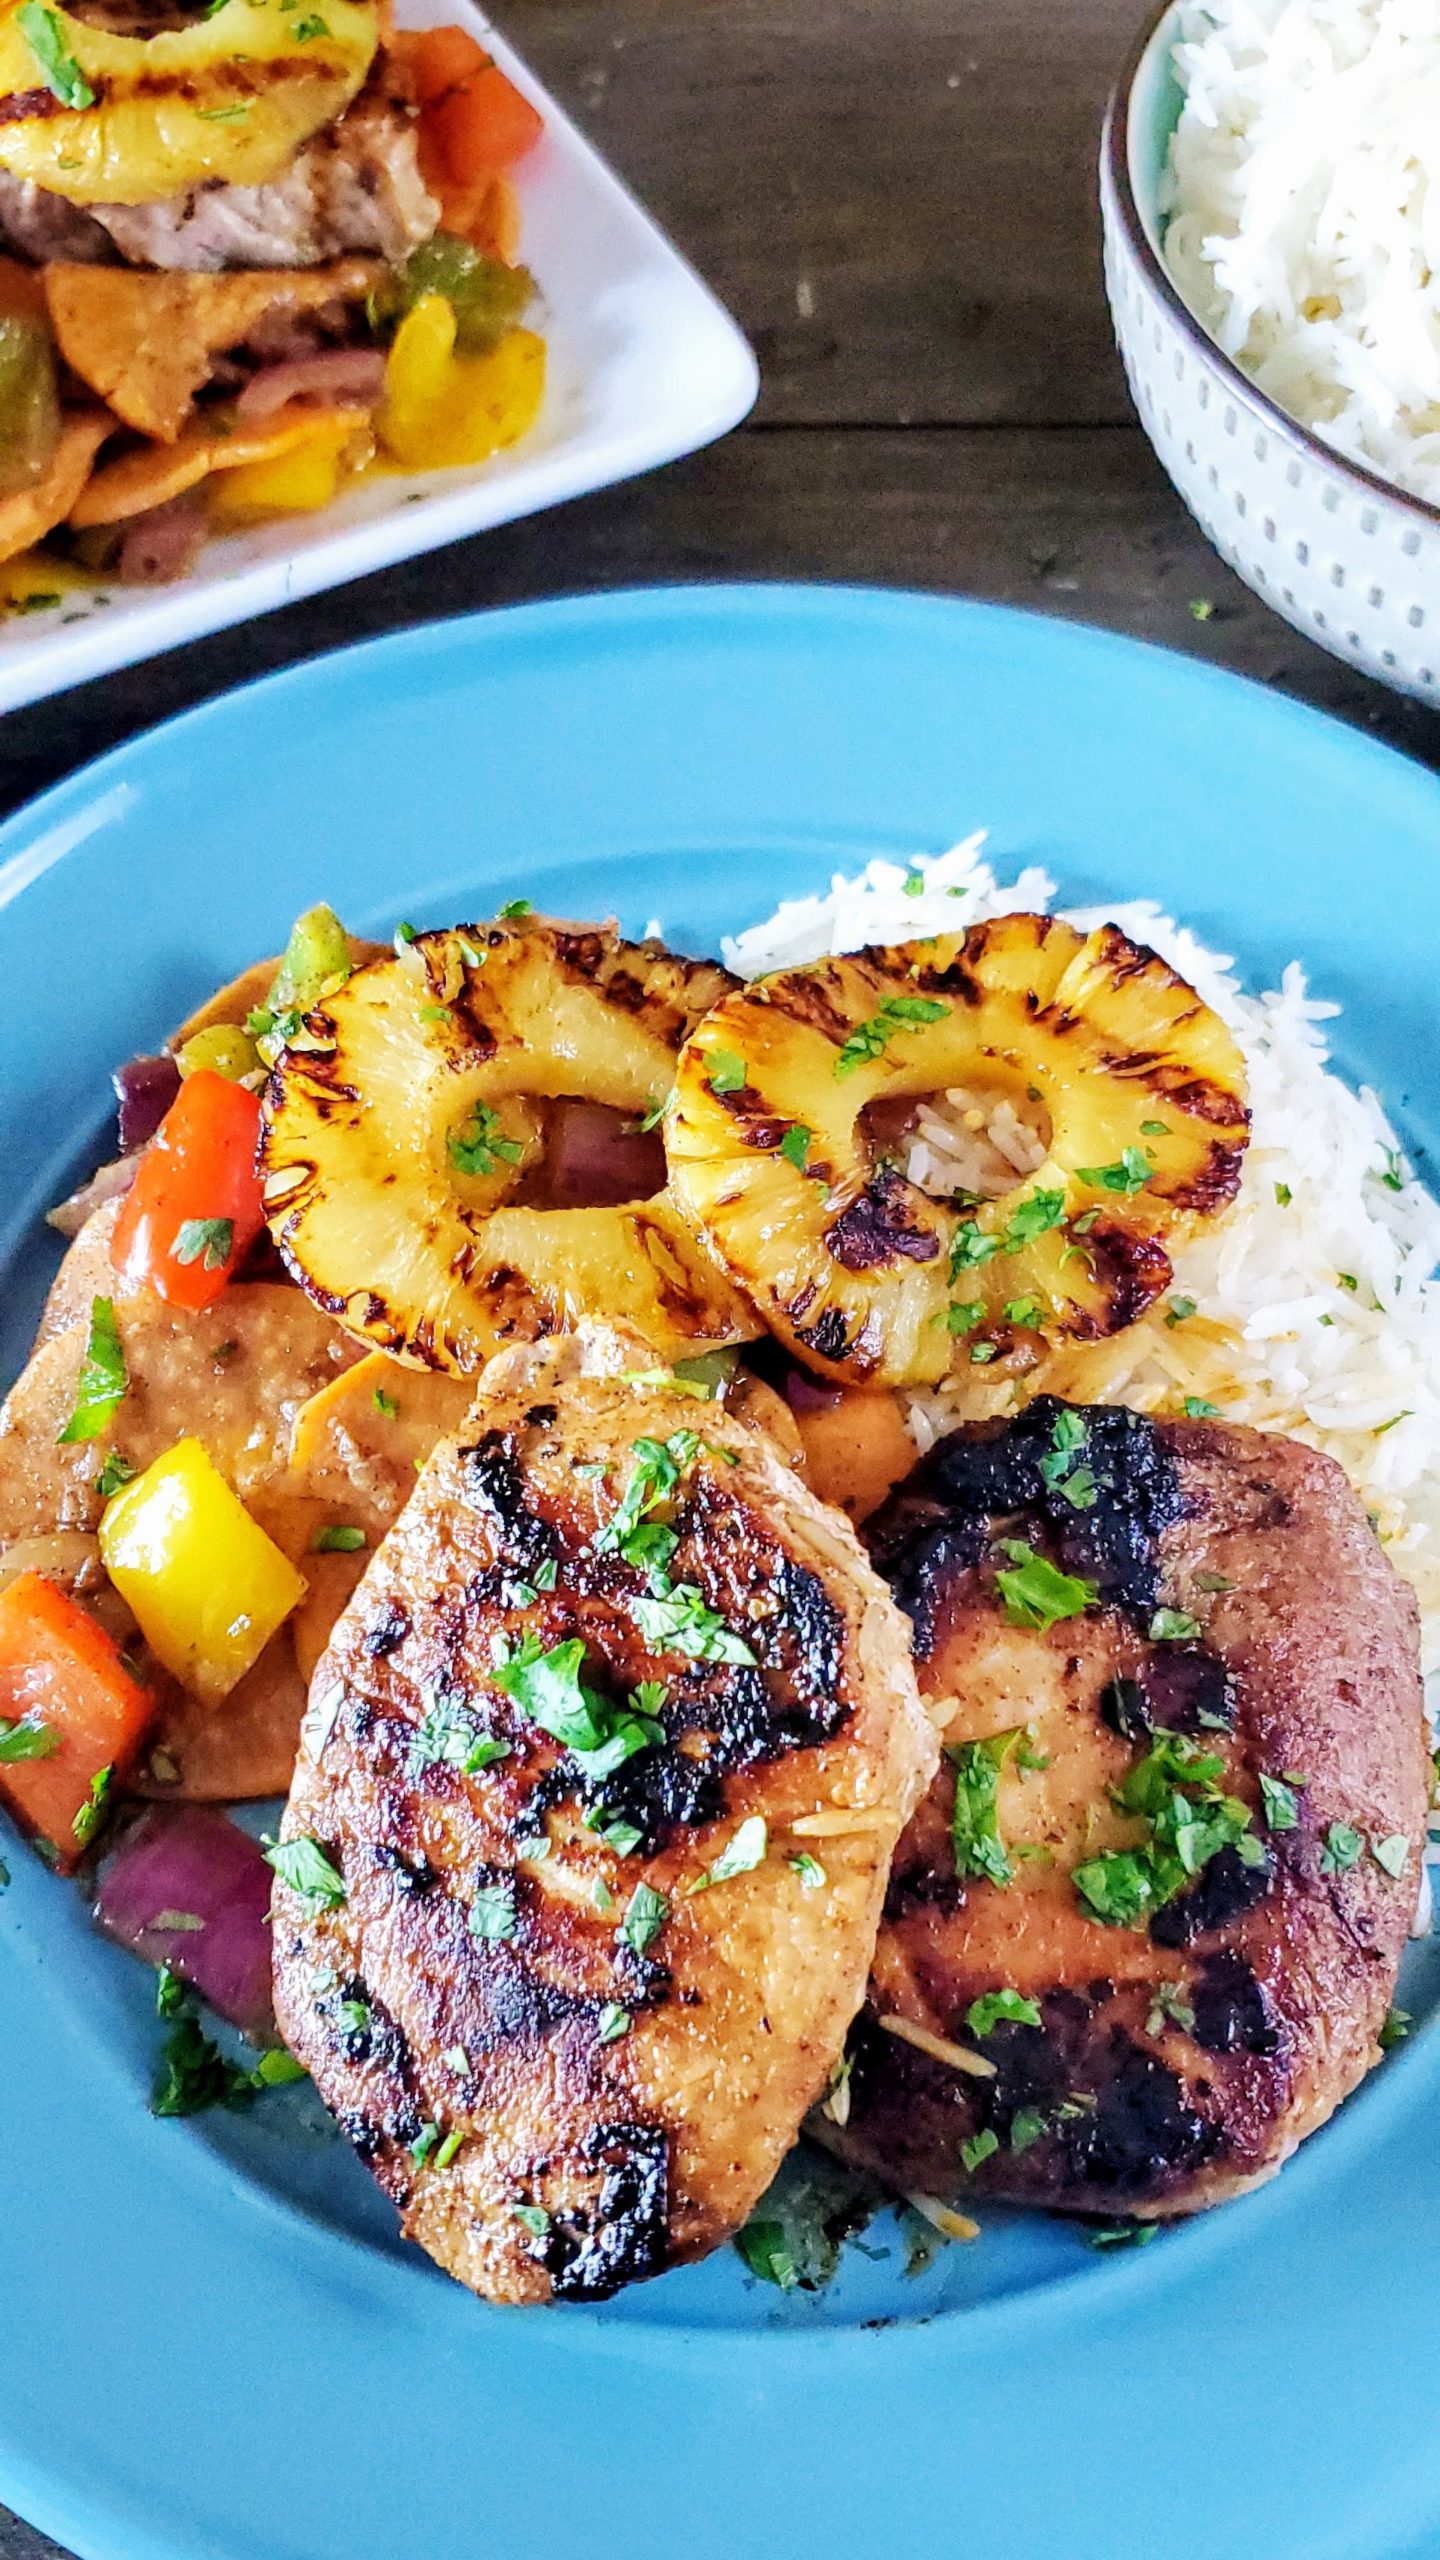 Tropical Pork Chops with Sweet Potatoes and Vegetables - Bacon & Vodka